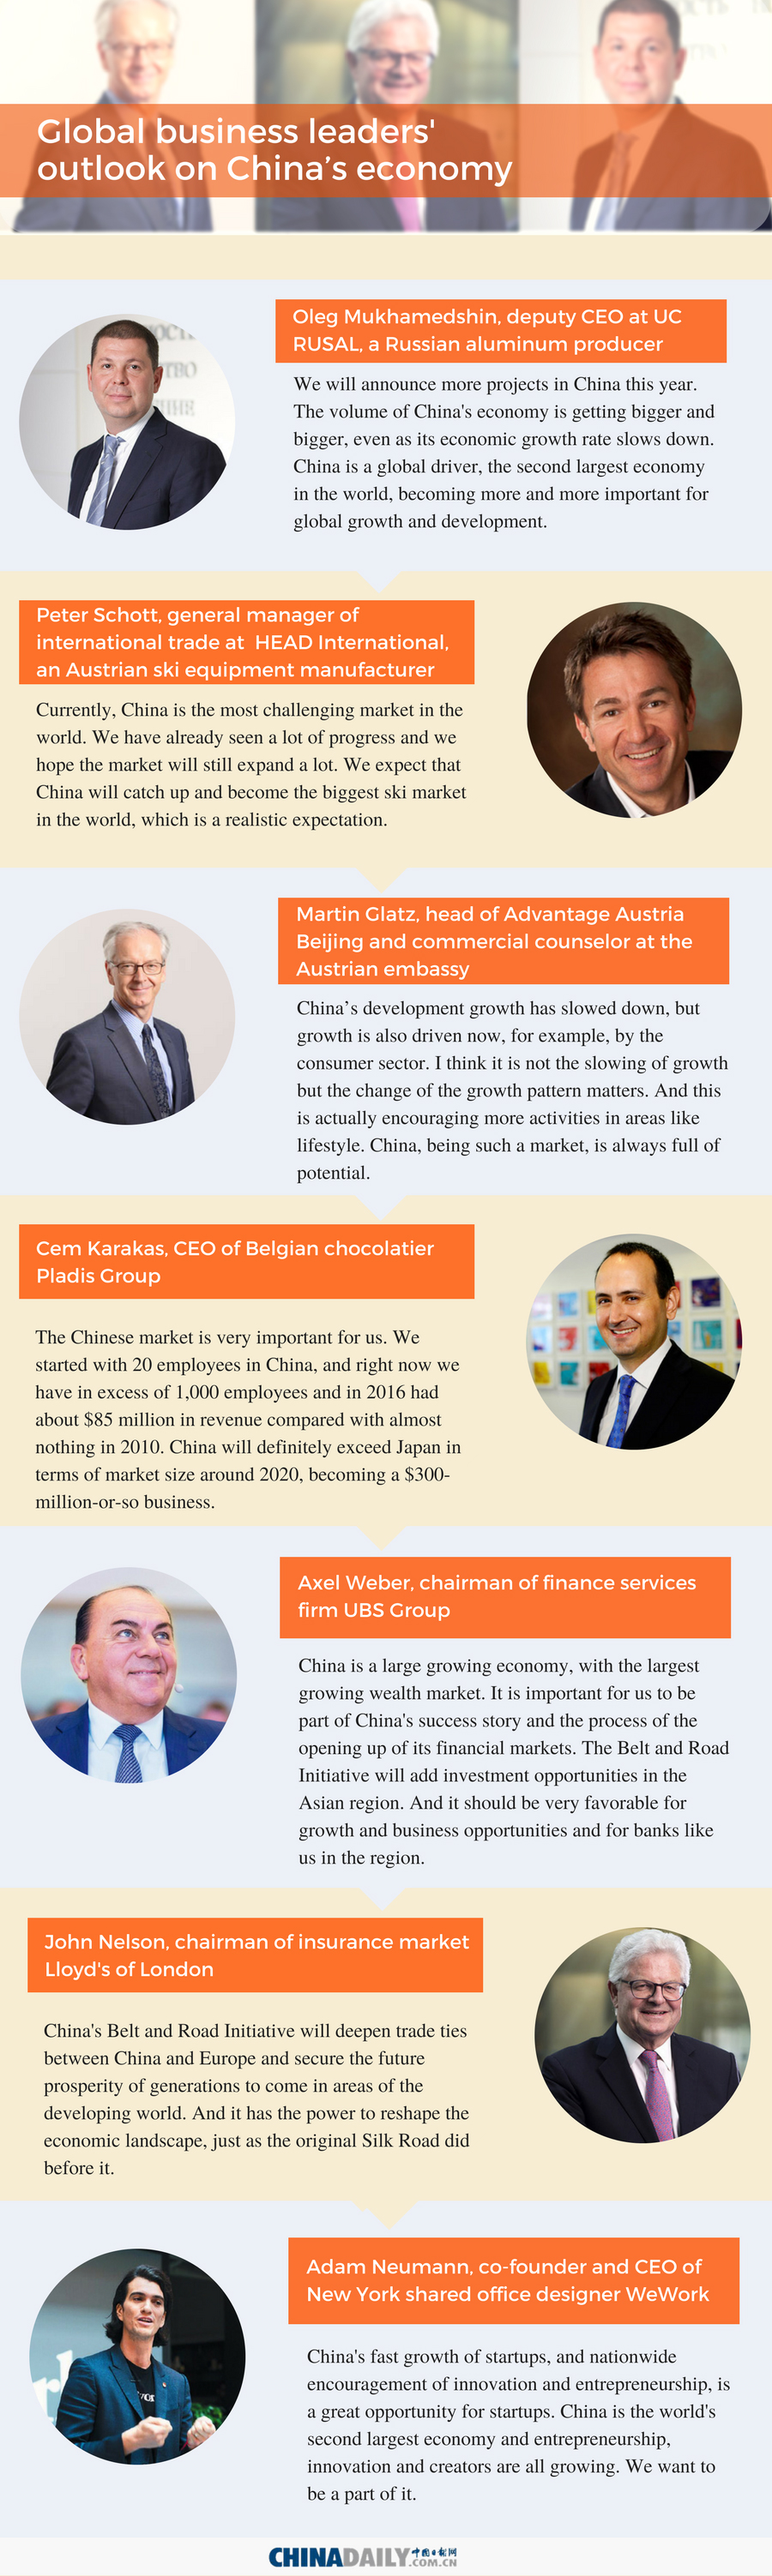 Global business leaders' outlook on China's economy